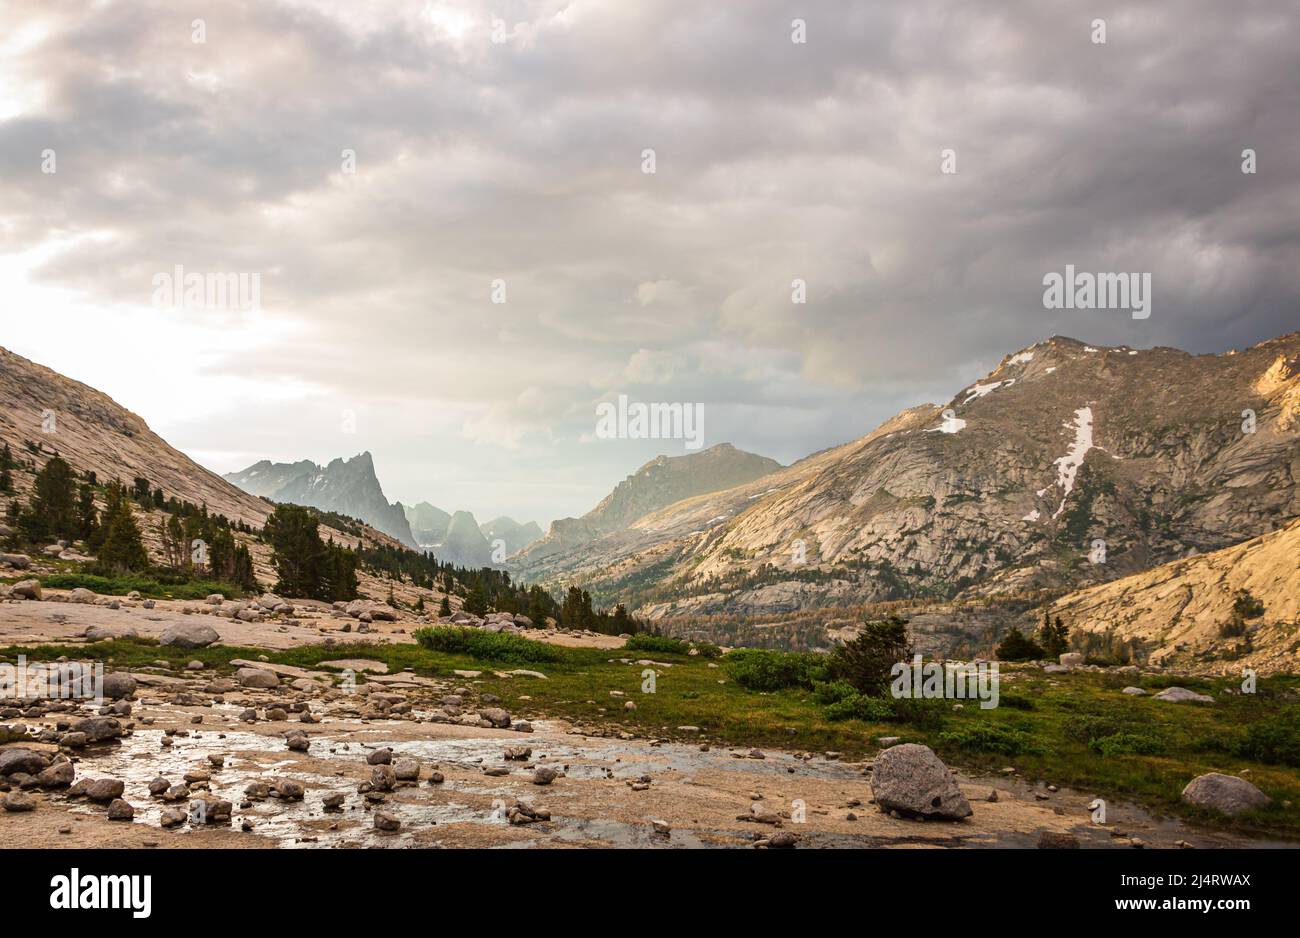 Scenic view of a mountainous valley after a hail storm on a summer day in the Wind River mountain range, Wyoming, USA Stock Photo